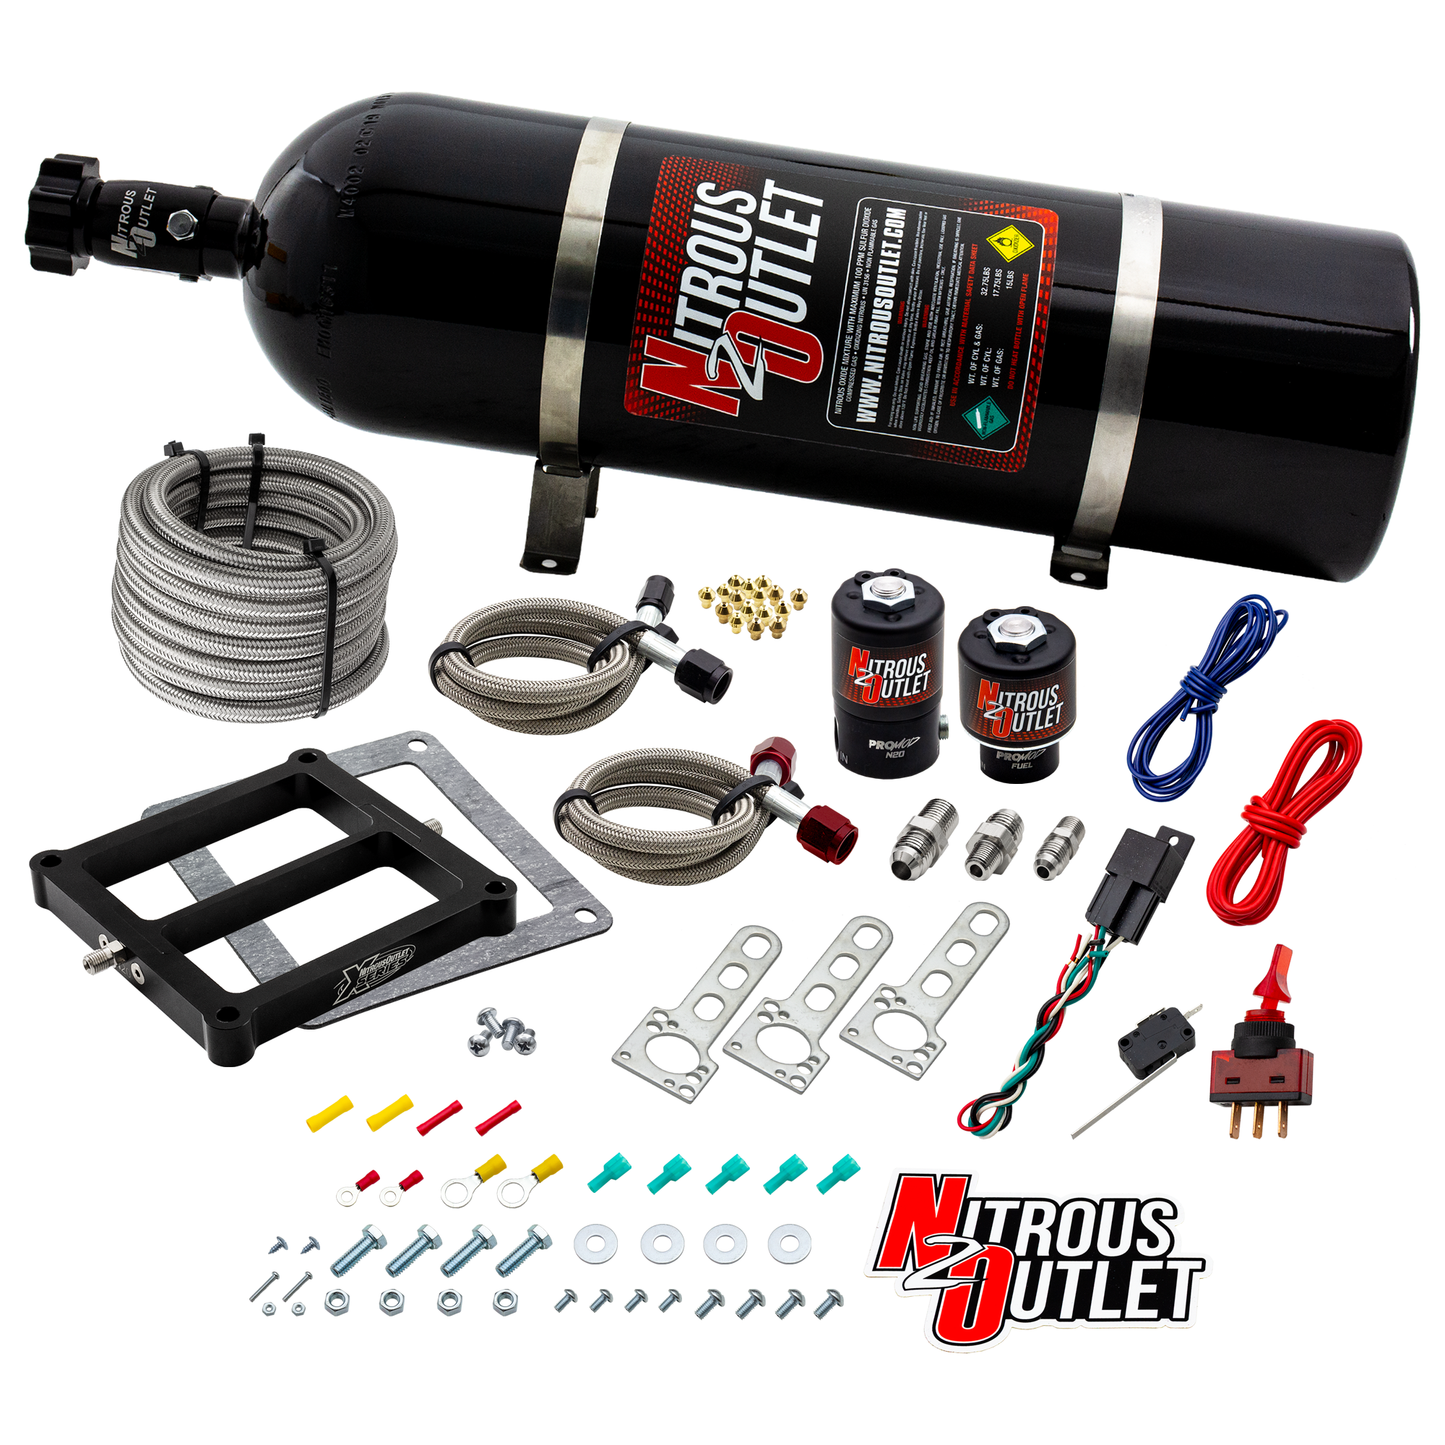 Nitrous Outlet Weekend Warrior Wet 4500 Nitrous Plate System